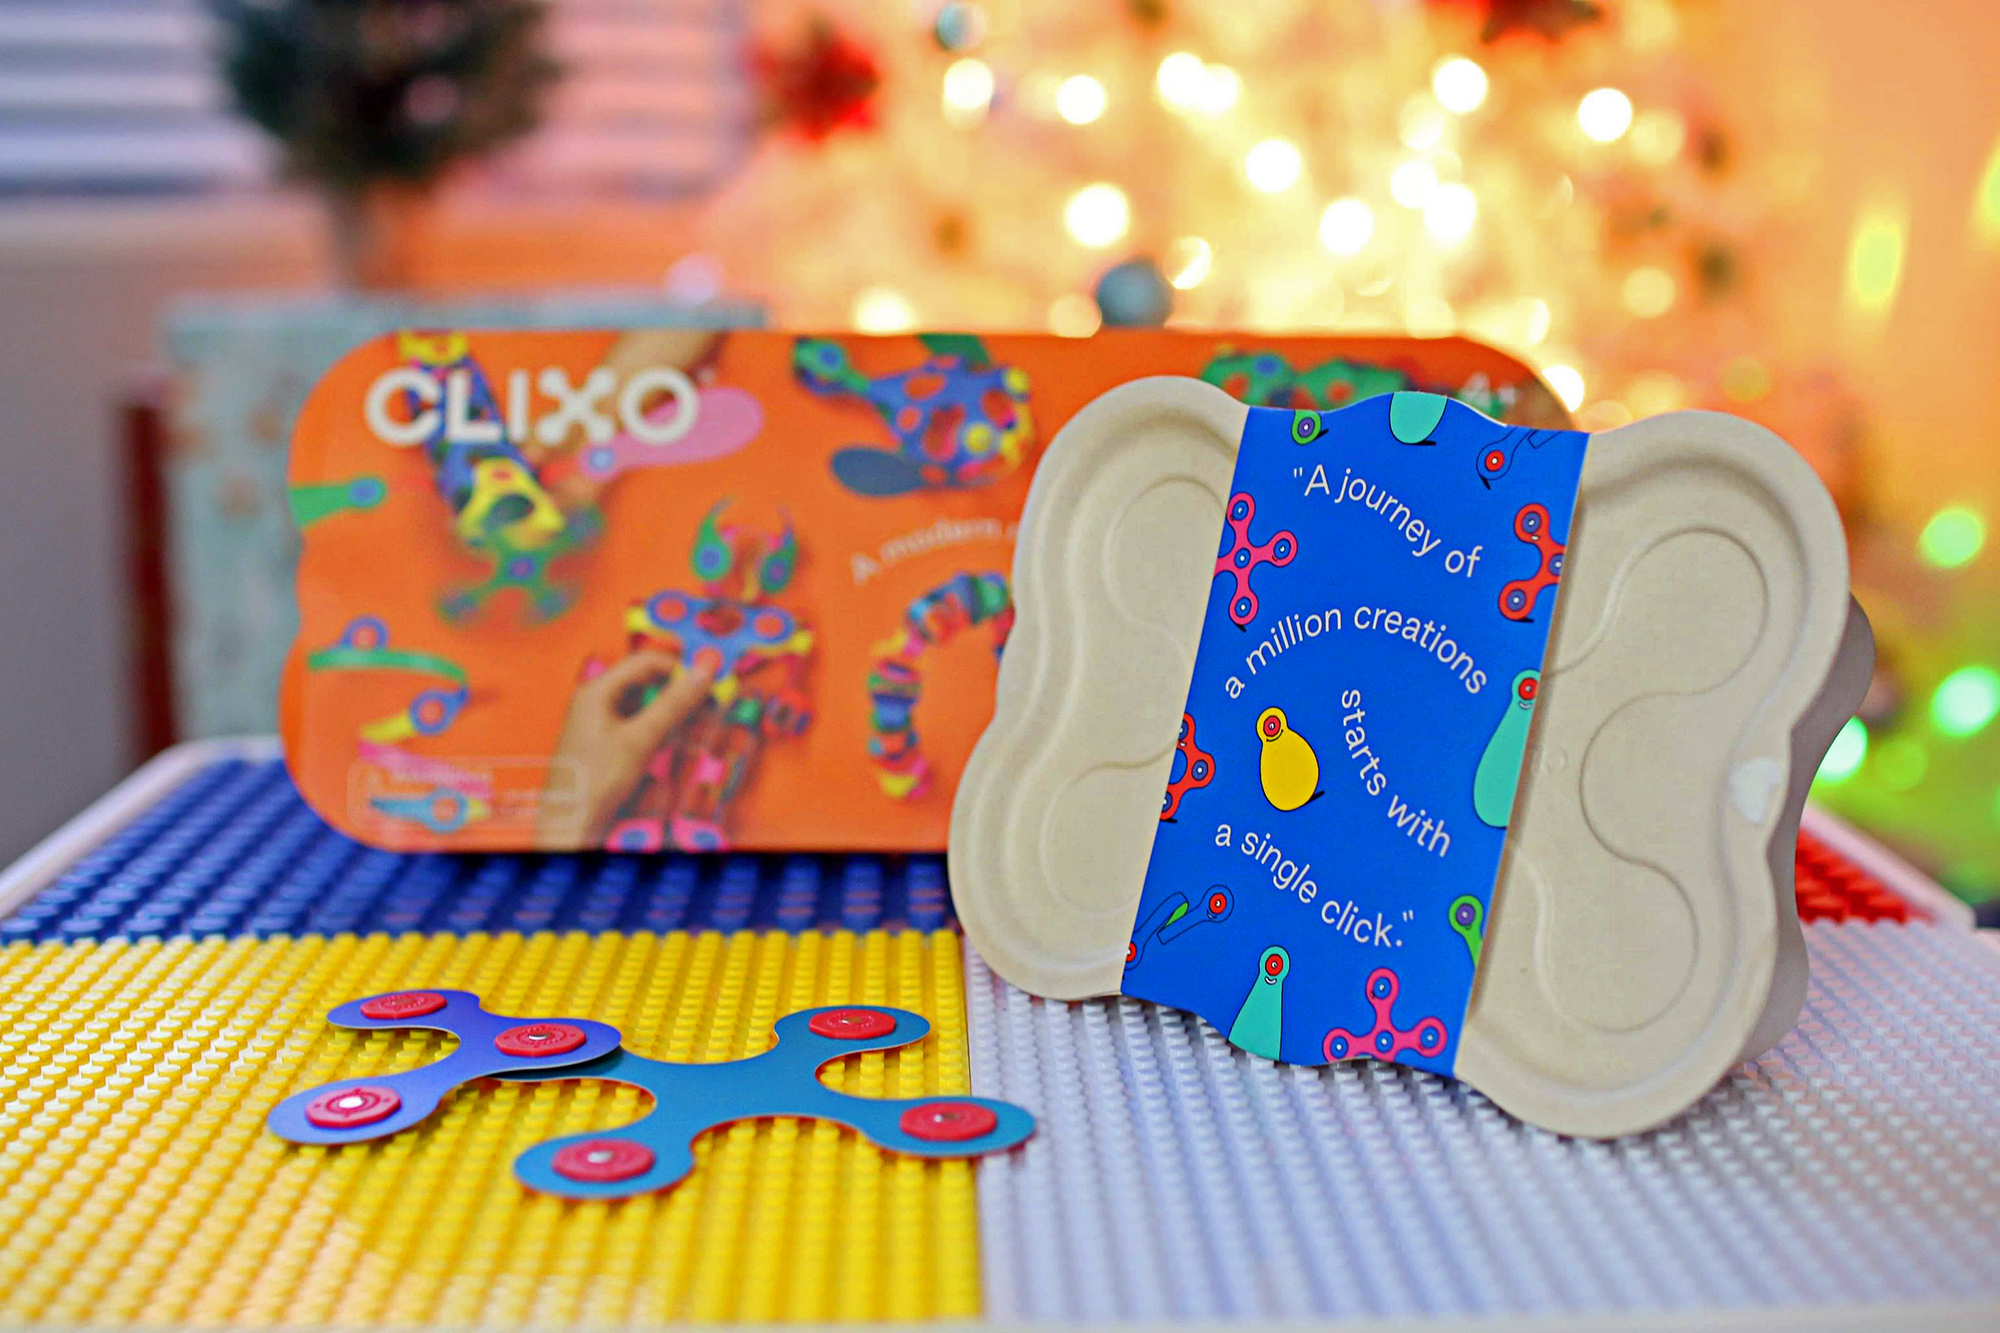 CLIXO, Magnetic toys, Off screen play, Magnetic wearables, STEAM approved, Magnetic building blocks, Magnet, Montessori Toy, Toy Review